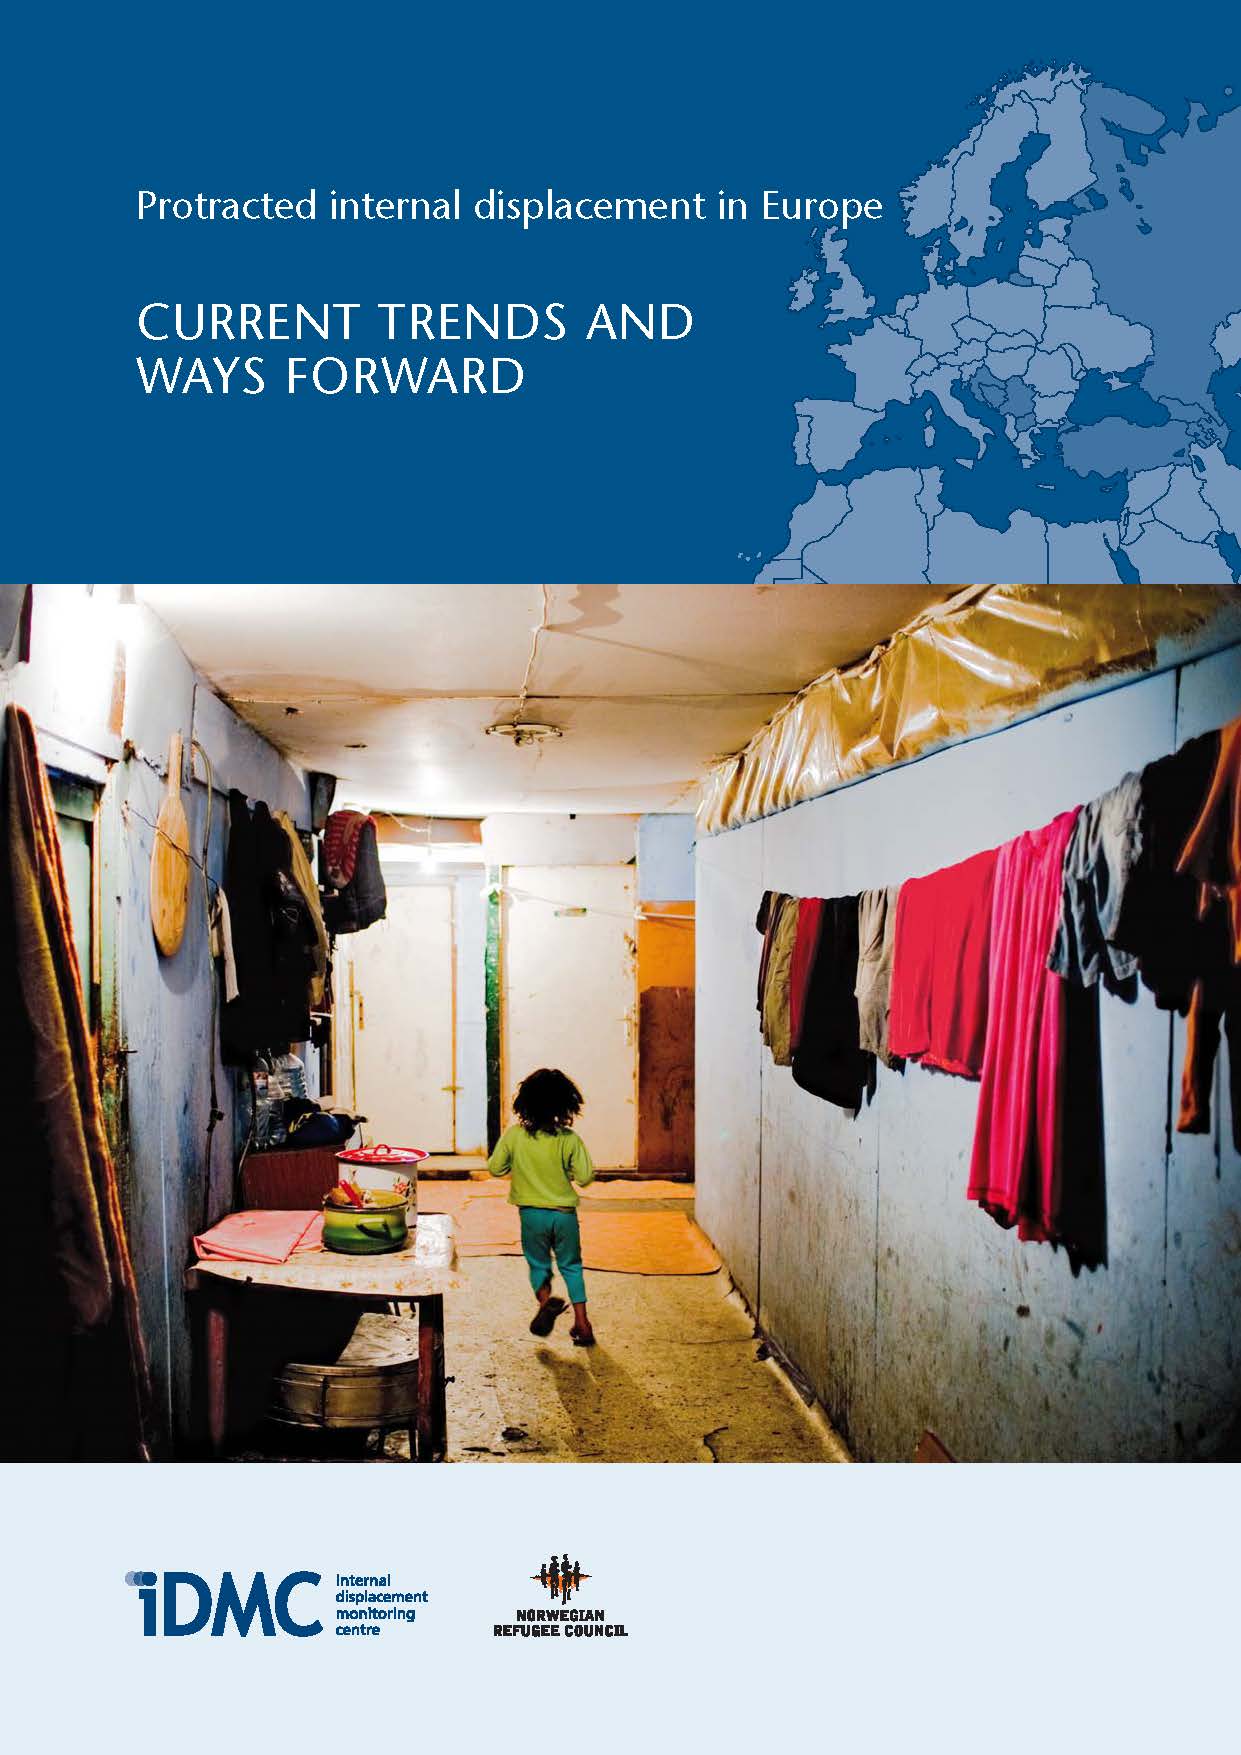 Protracted internal displacement in Europe: current trends and ways forward